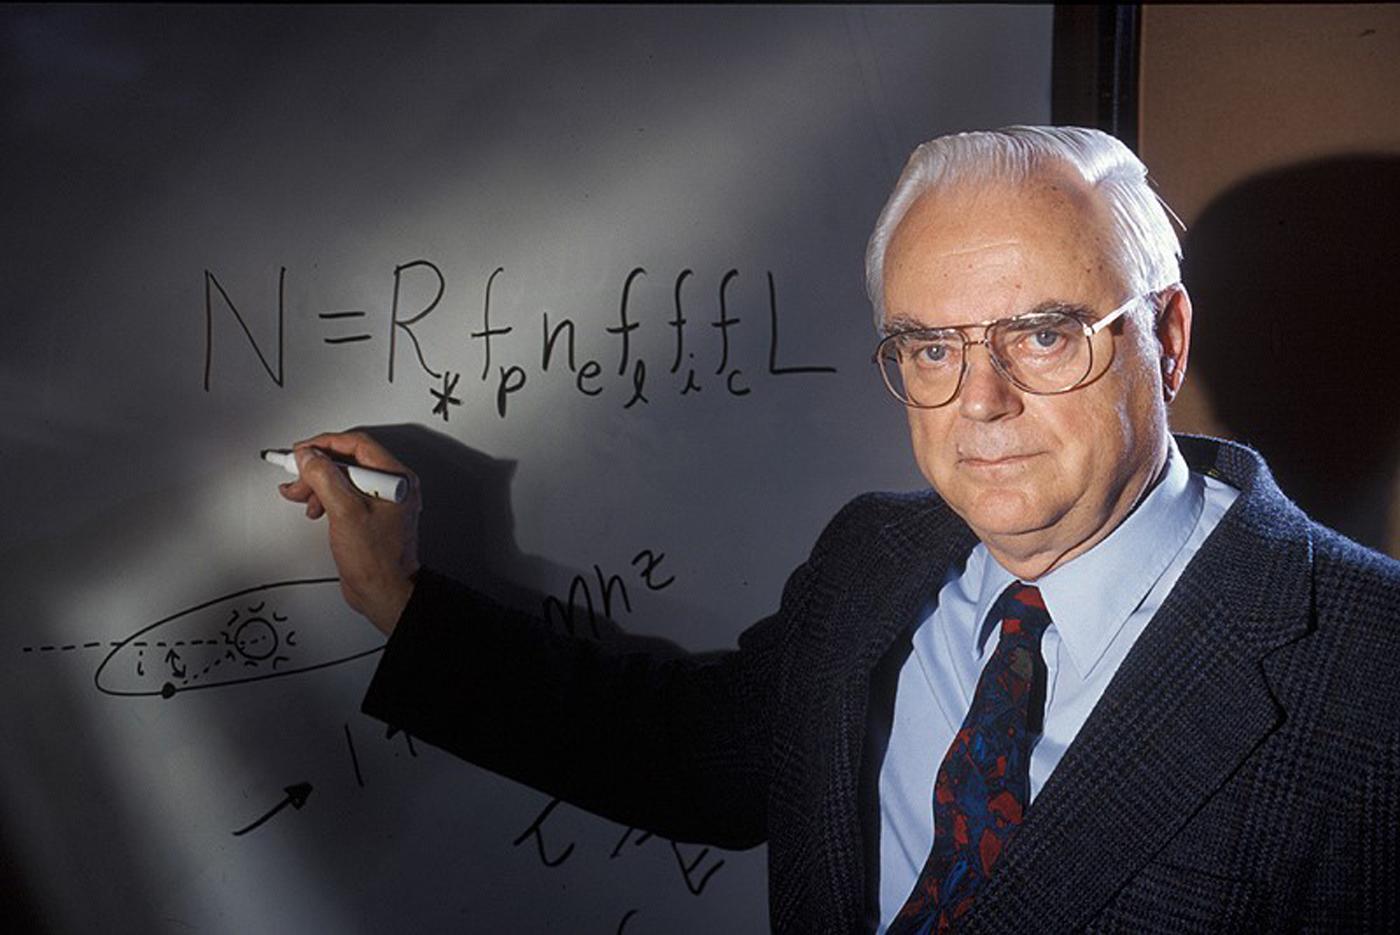 Image of Frank Drake writing down the Drake Equation on a whiteboard